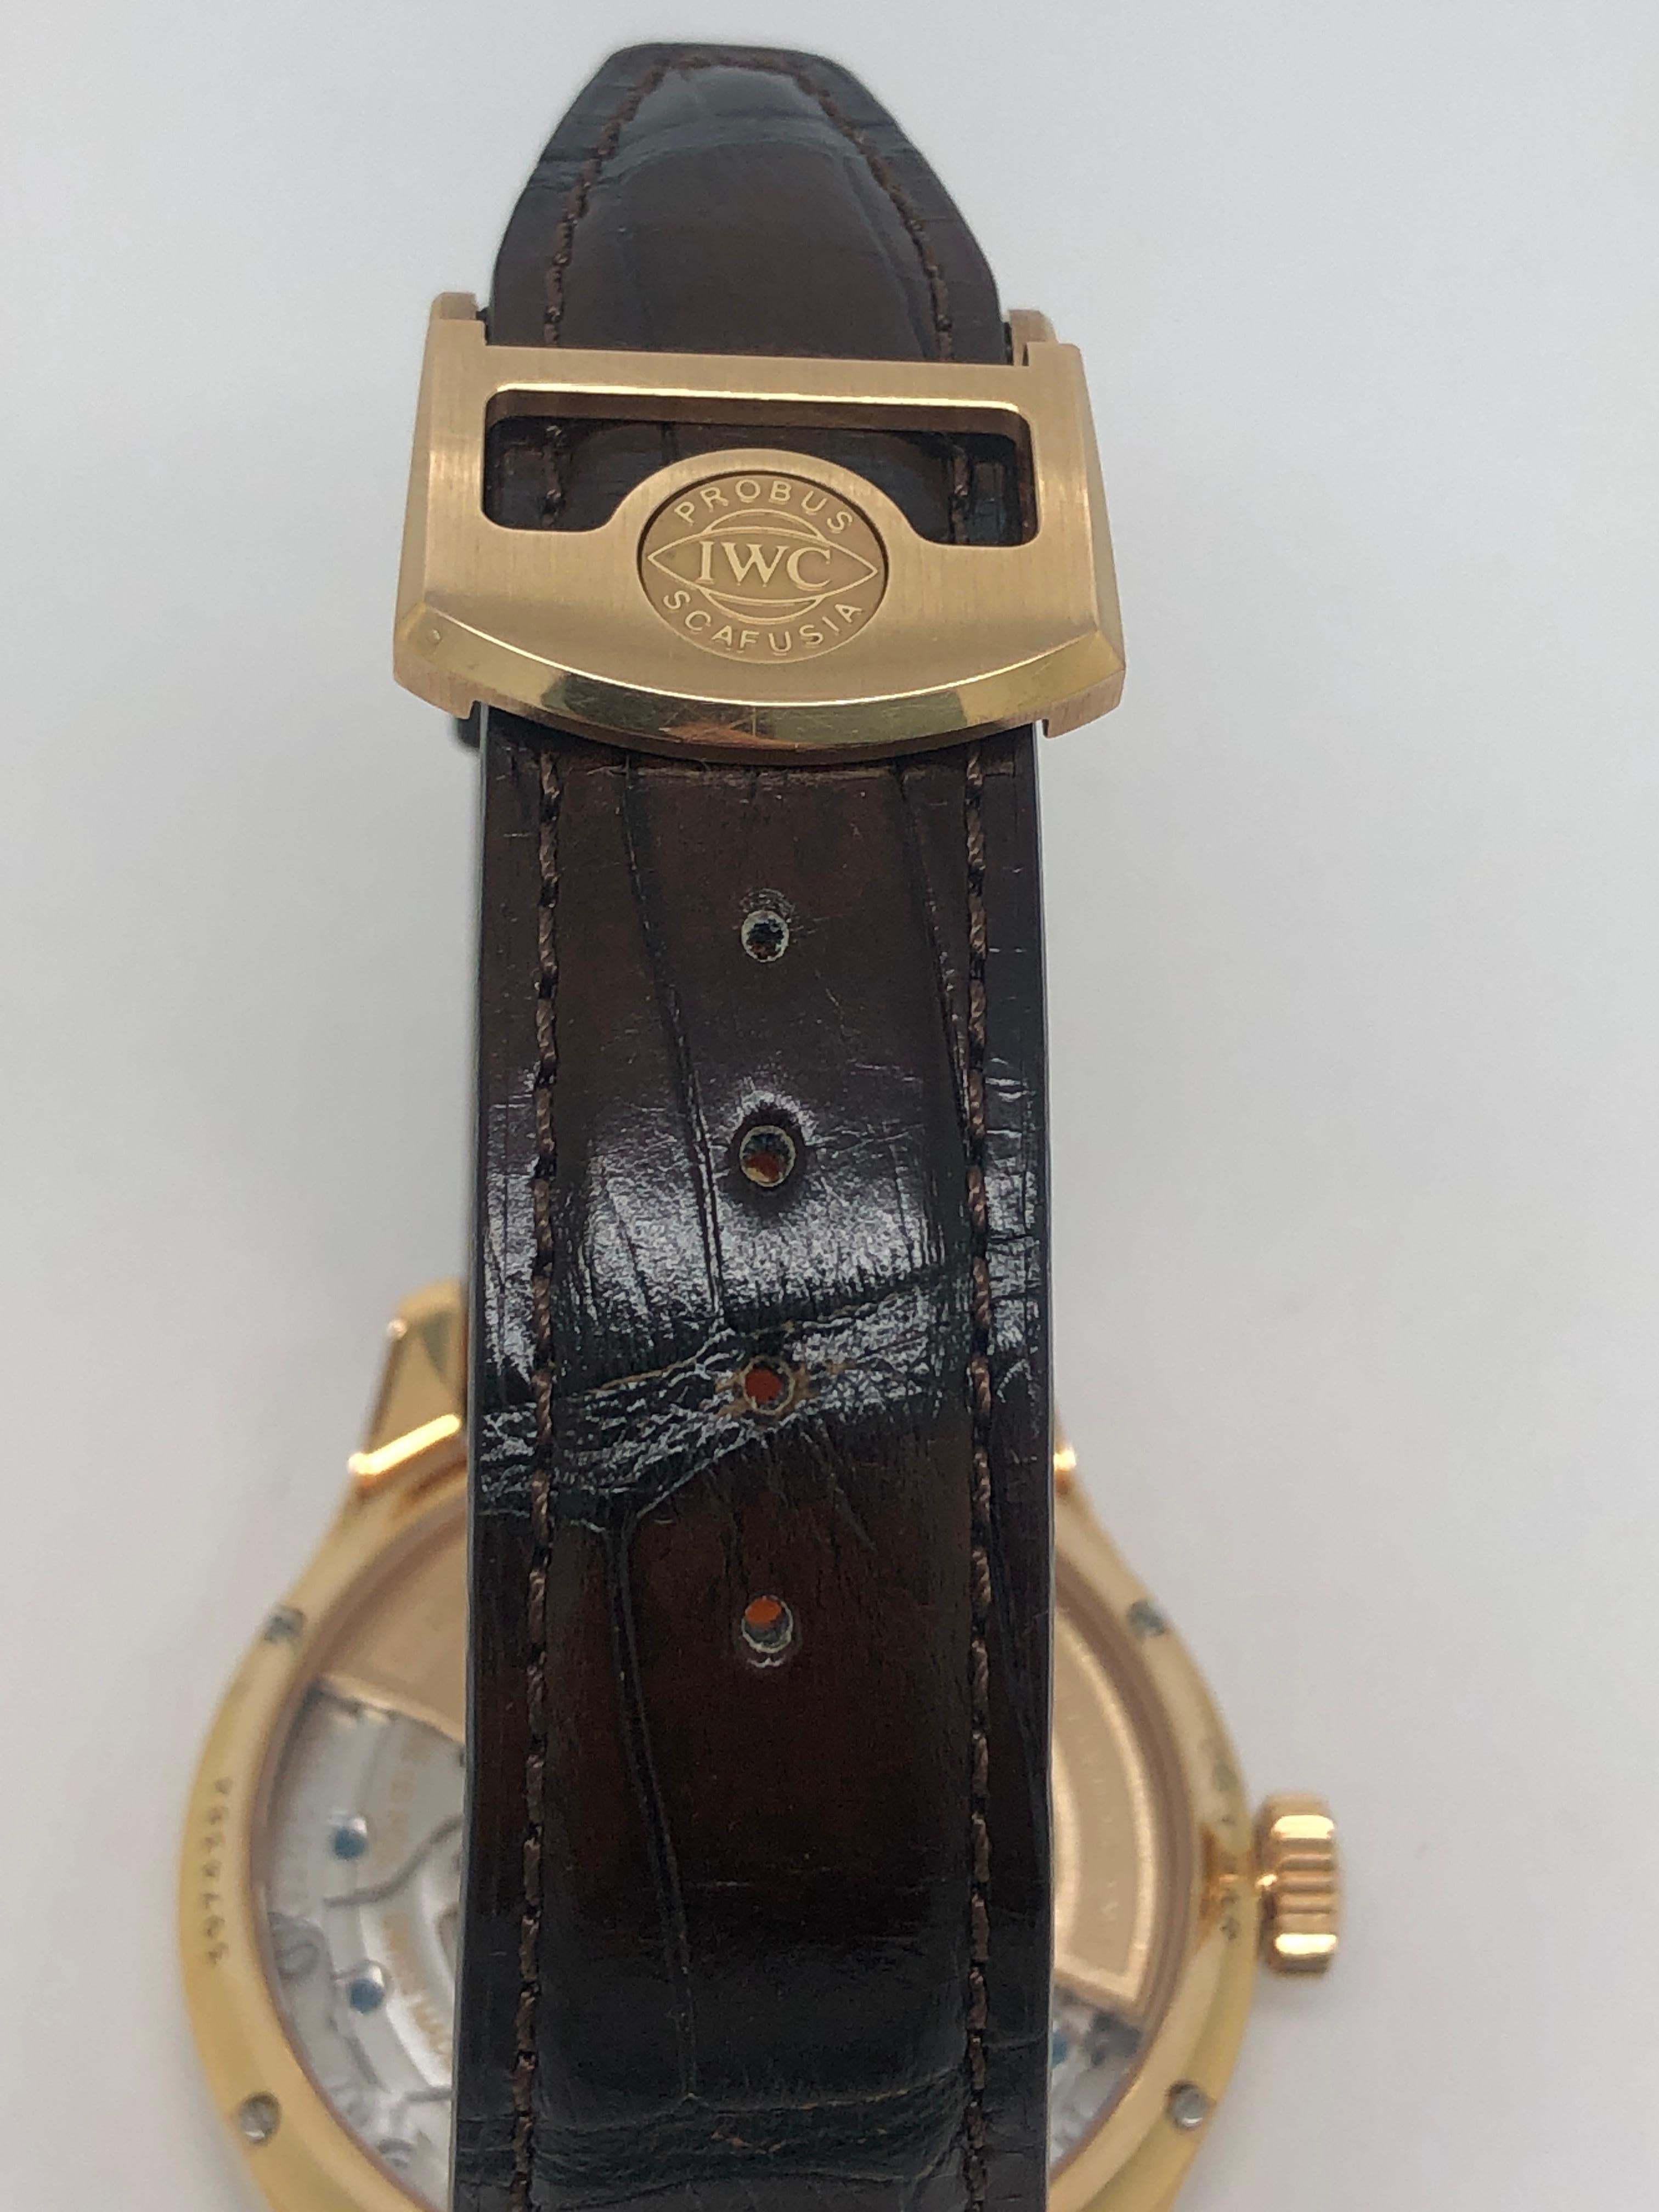 IWC Portugleser Perpetaul Calendar Men's watch In Excellent Condition For Sale In New York, NY